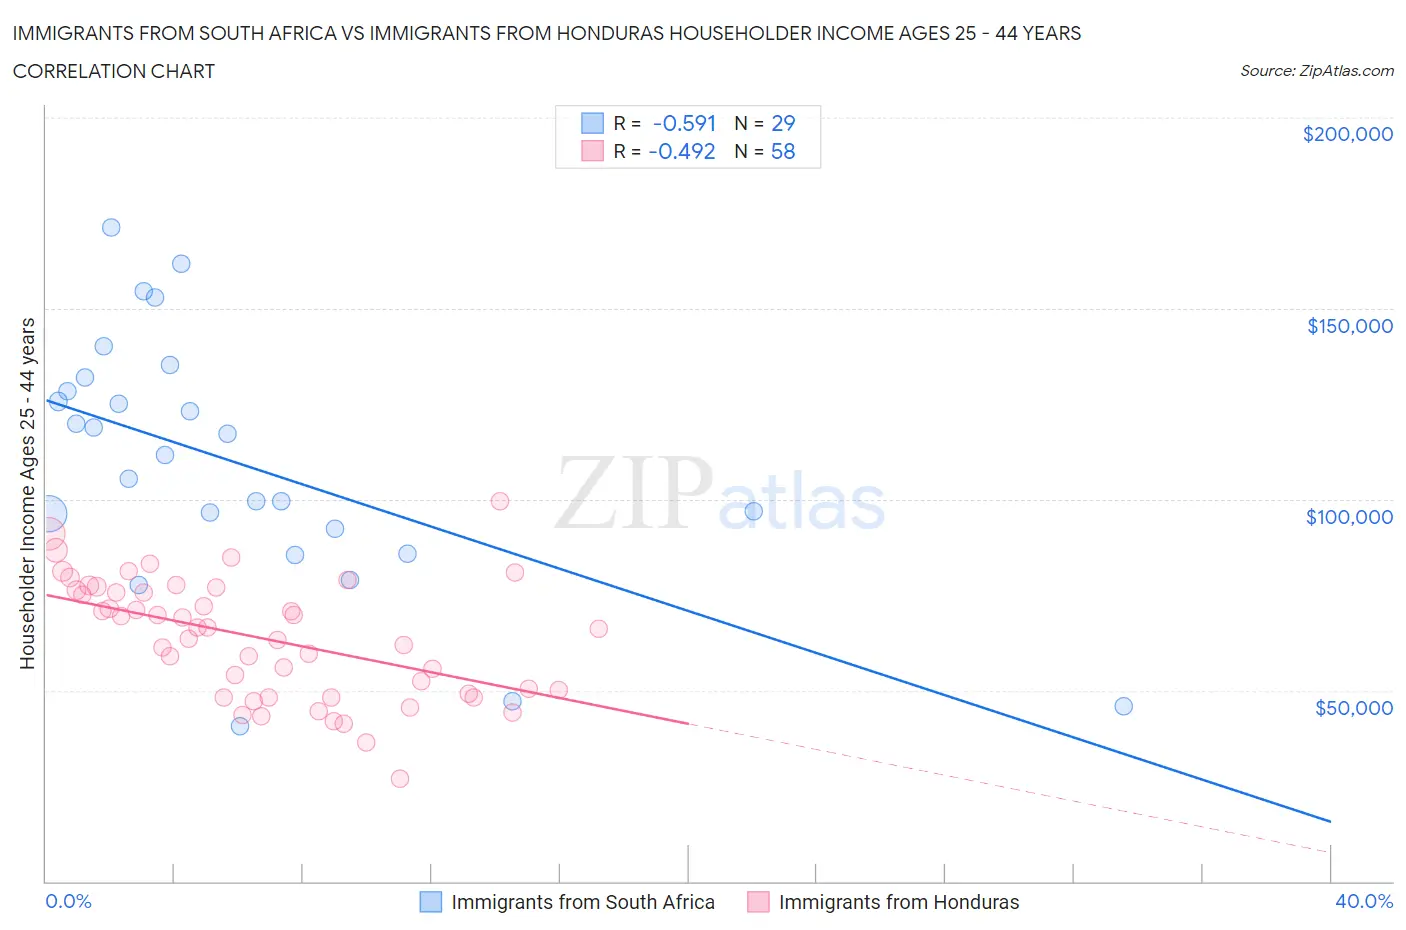 Immigrants from South Africa vs Immigrants from Honduras Householder Income Ages 25 - 44 years